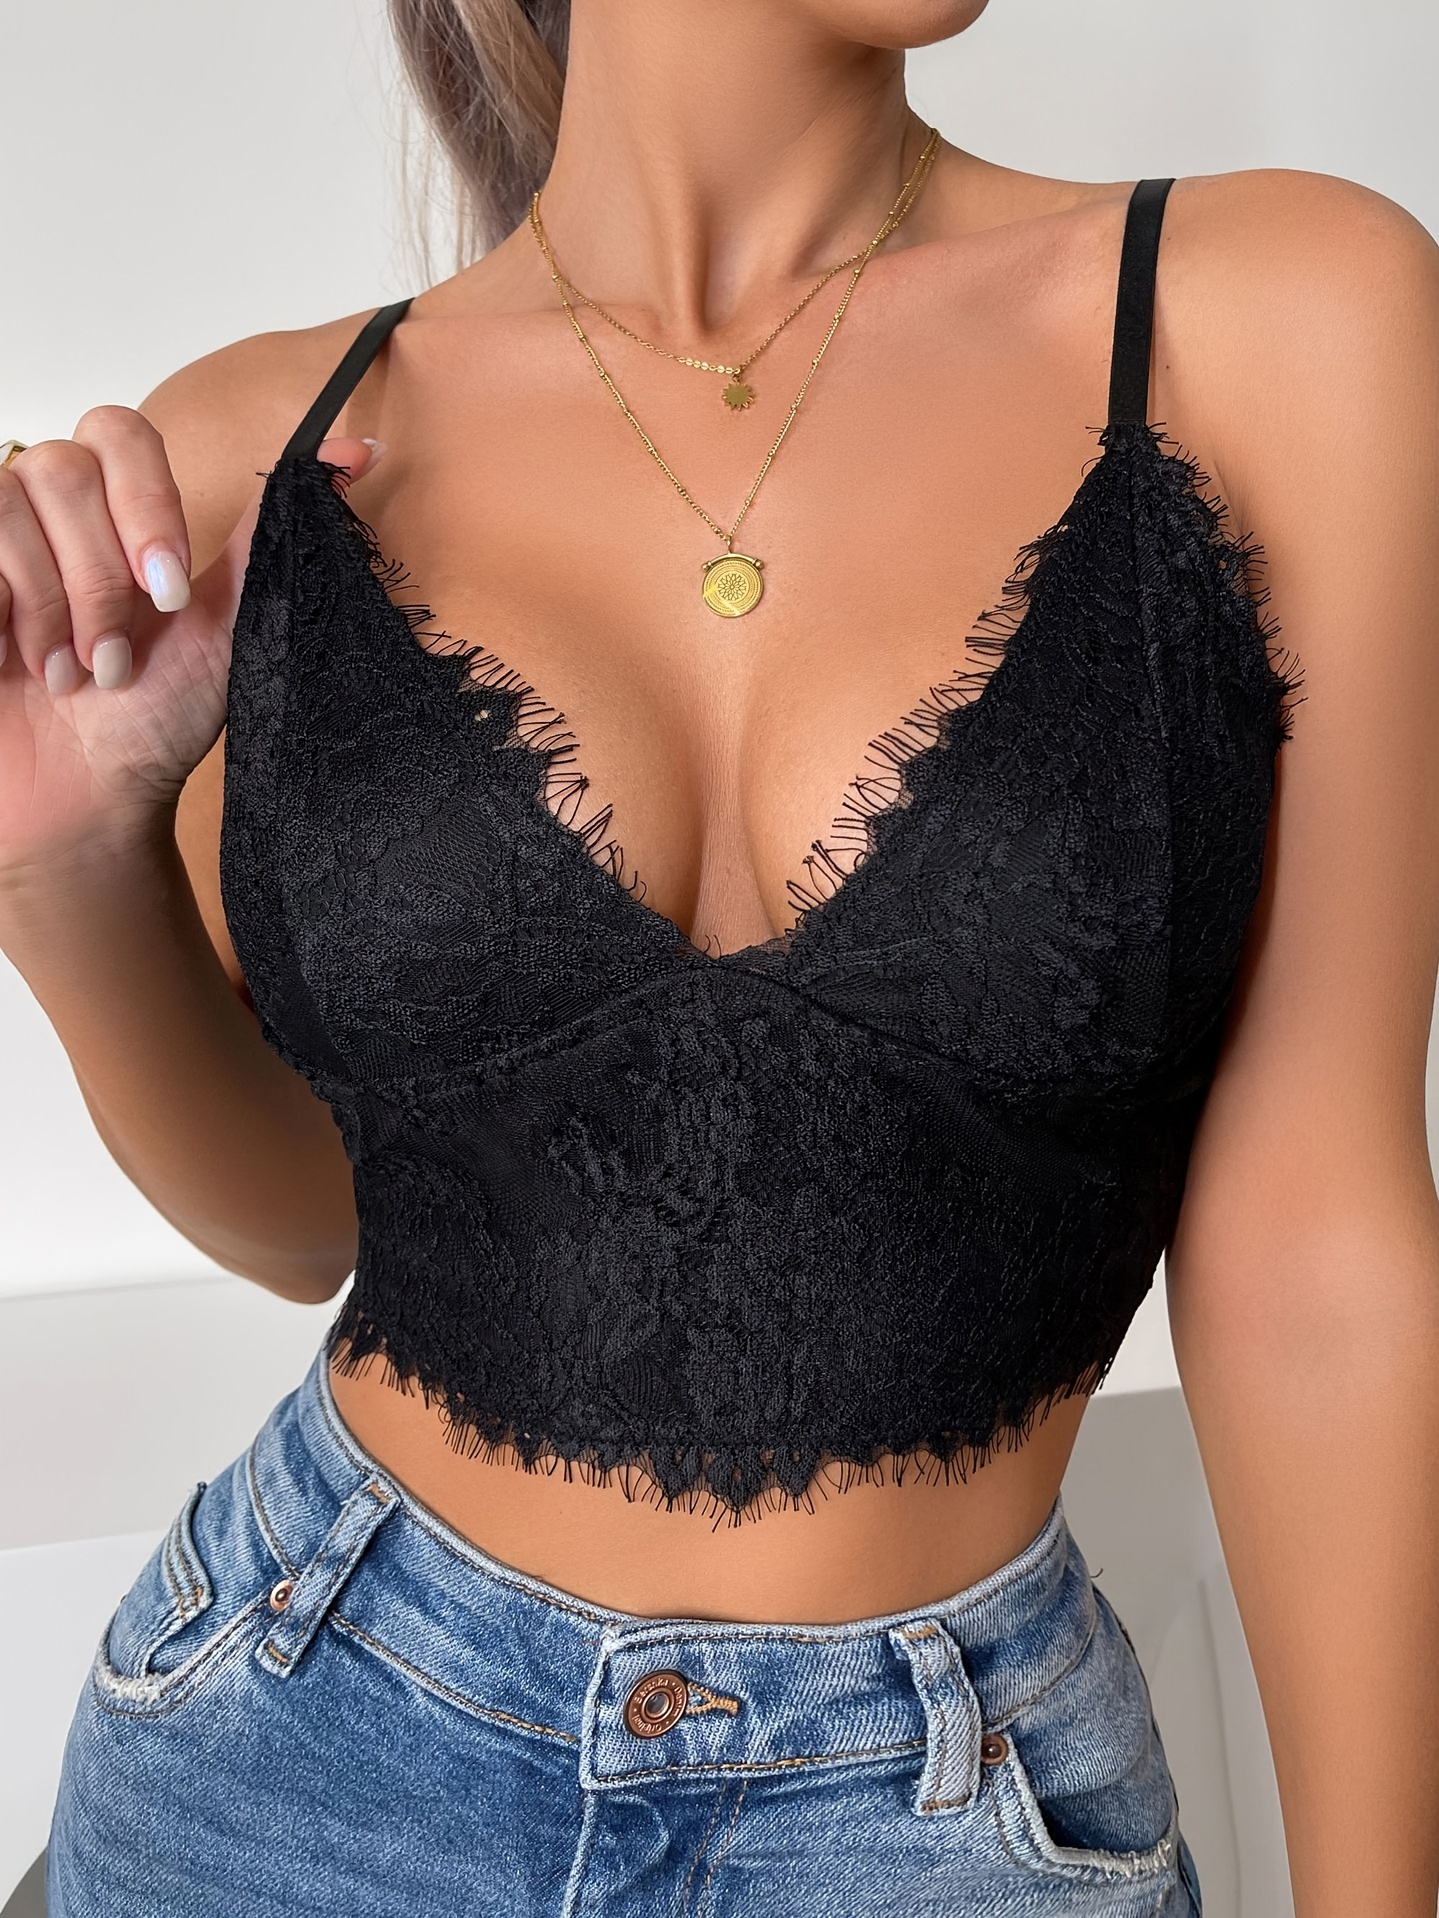 Versatile Ruched Knit Cami Top in Black - Retro, Indie and Unique Fashion